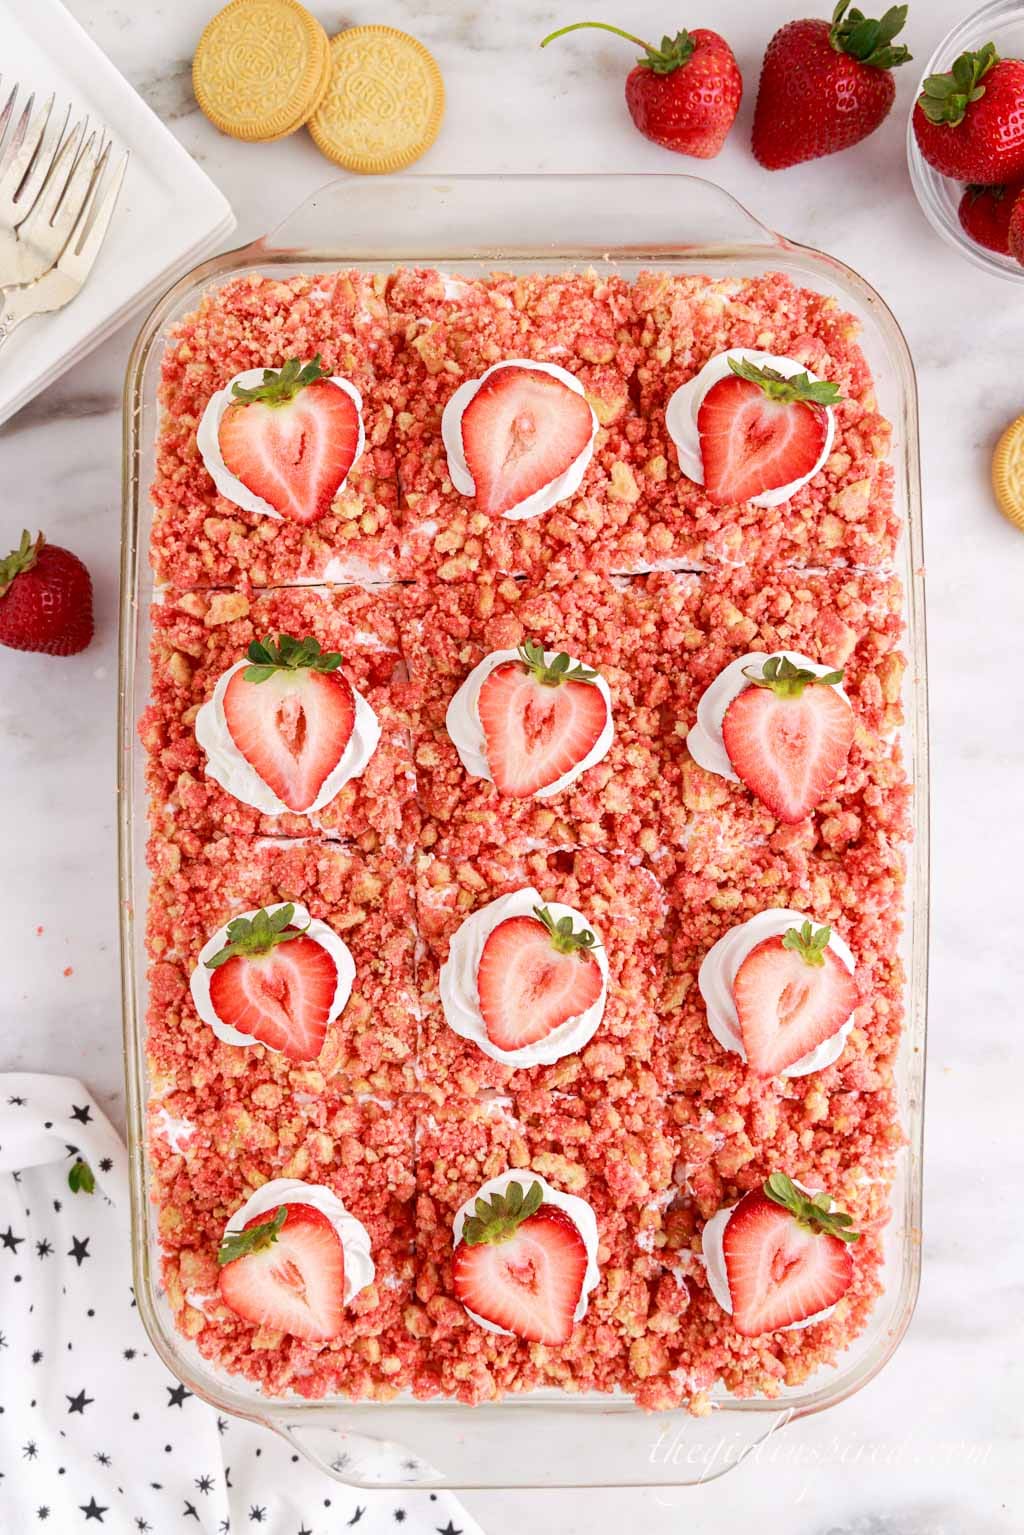 Assembled strawberry crunch poke cake garnished with Cool Whip and halved strawberries, atop a white marble surface with ingredients and a cloth scattered around in the background